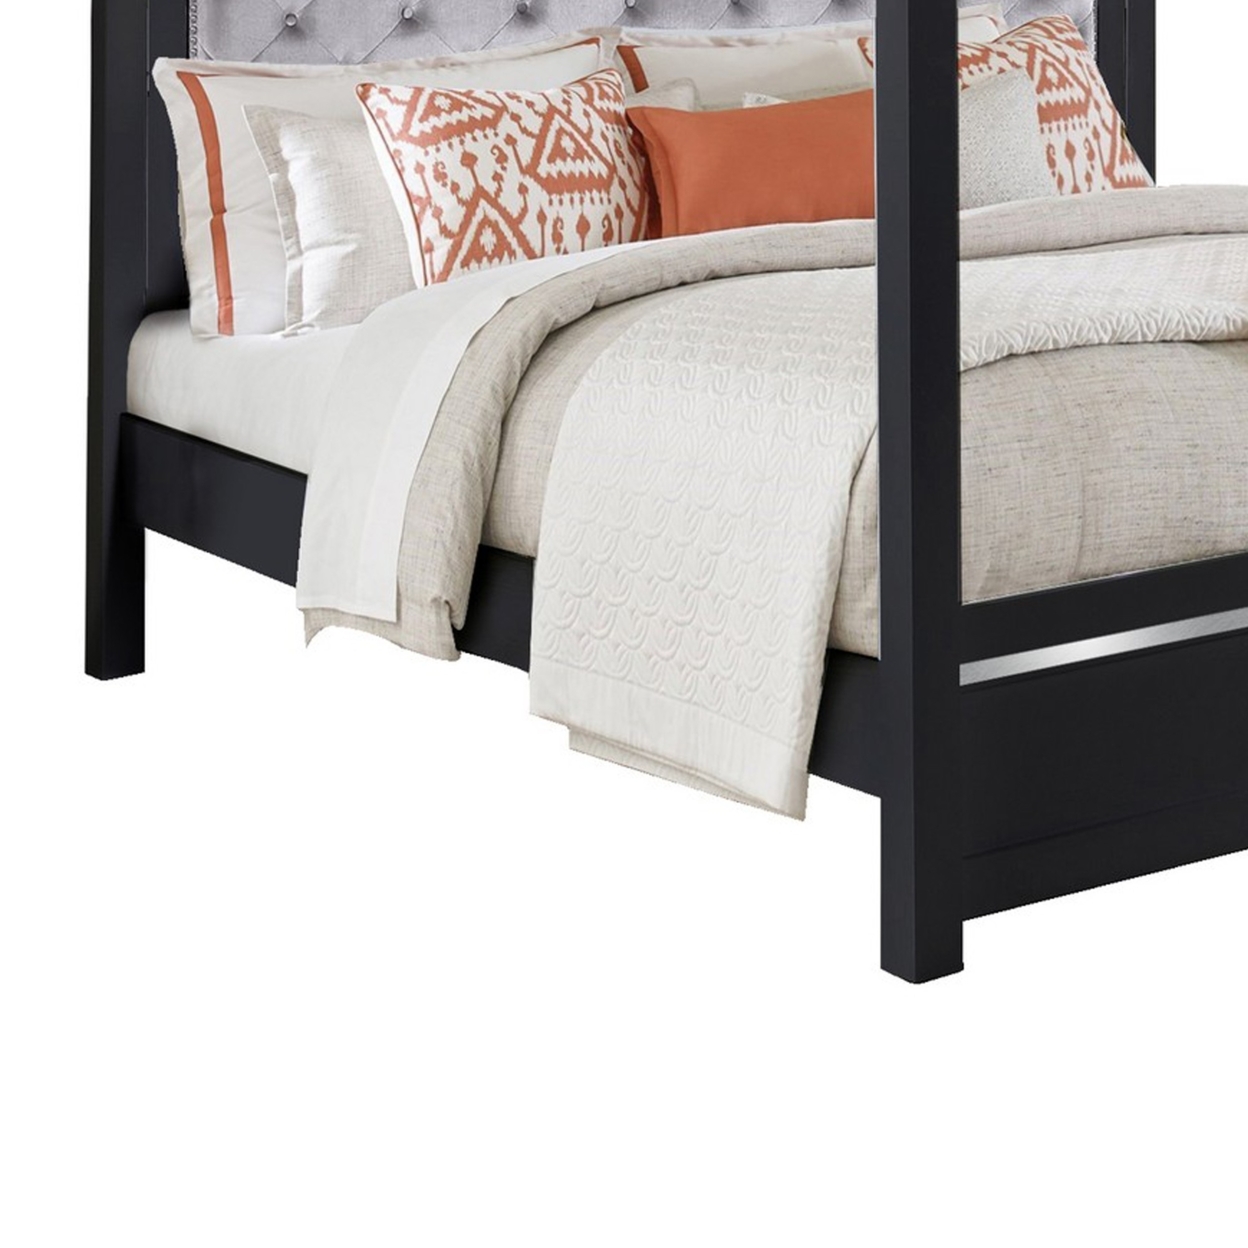 Abrie Solid Wood Canopy Queen Bed, Button Tufted, Touch LED, Dark Gray- Saltoro Sherpi